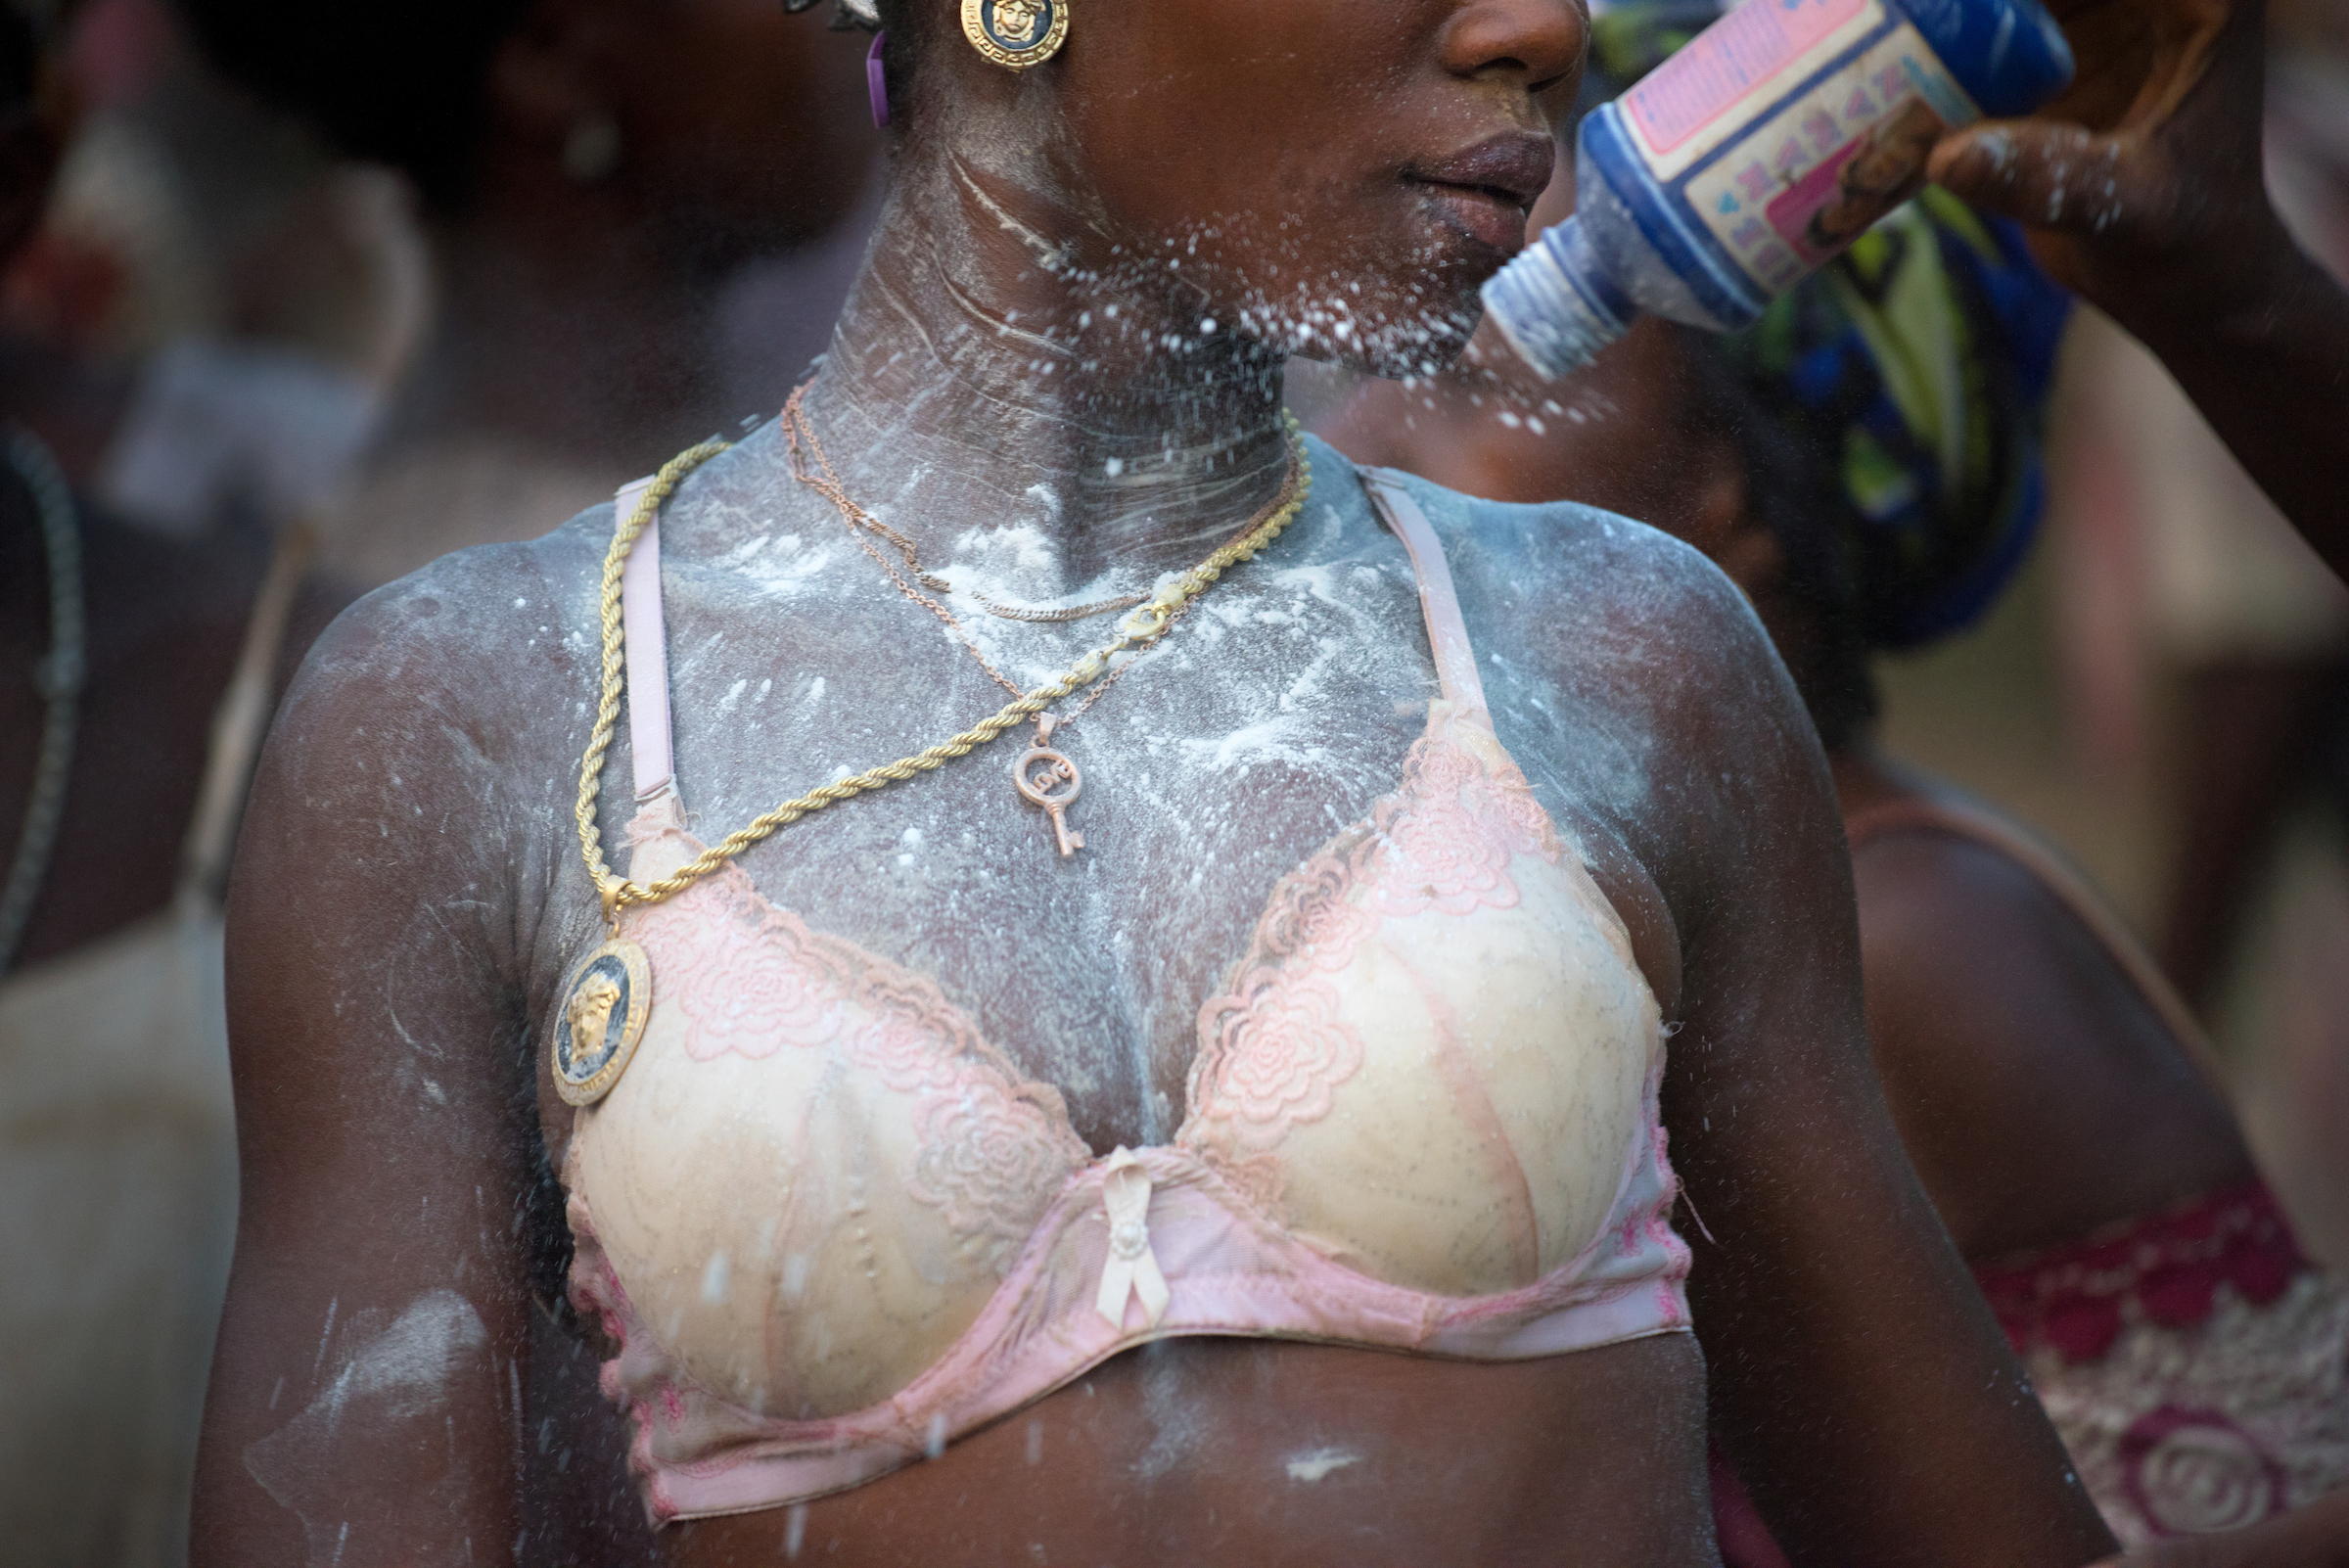 Elizabeth, 19 and Rebecca, 13, are showered in baby powder and dance in preparation for their initiation ceremony. 